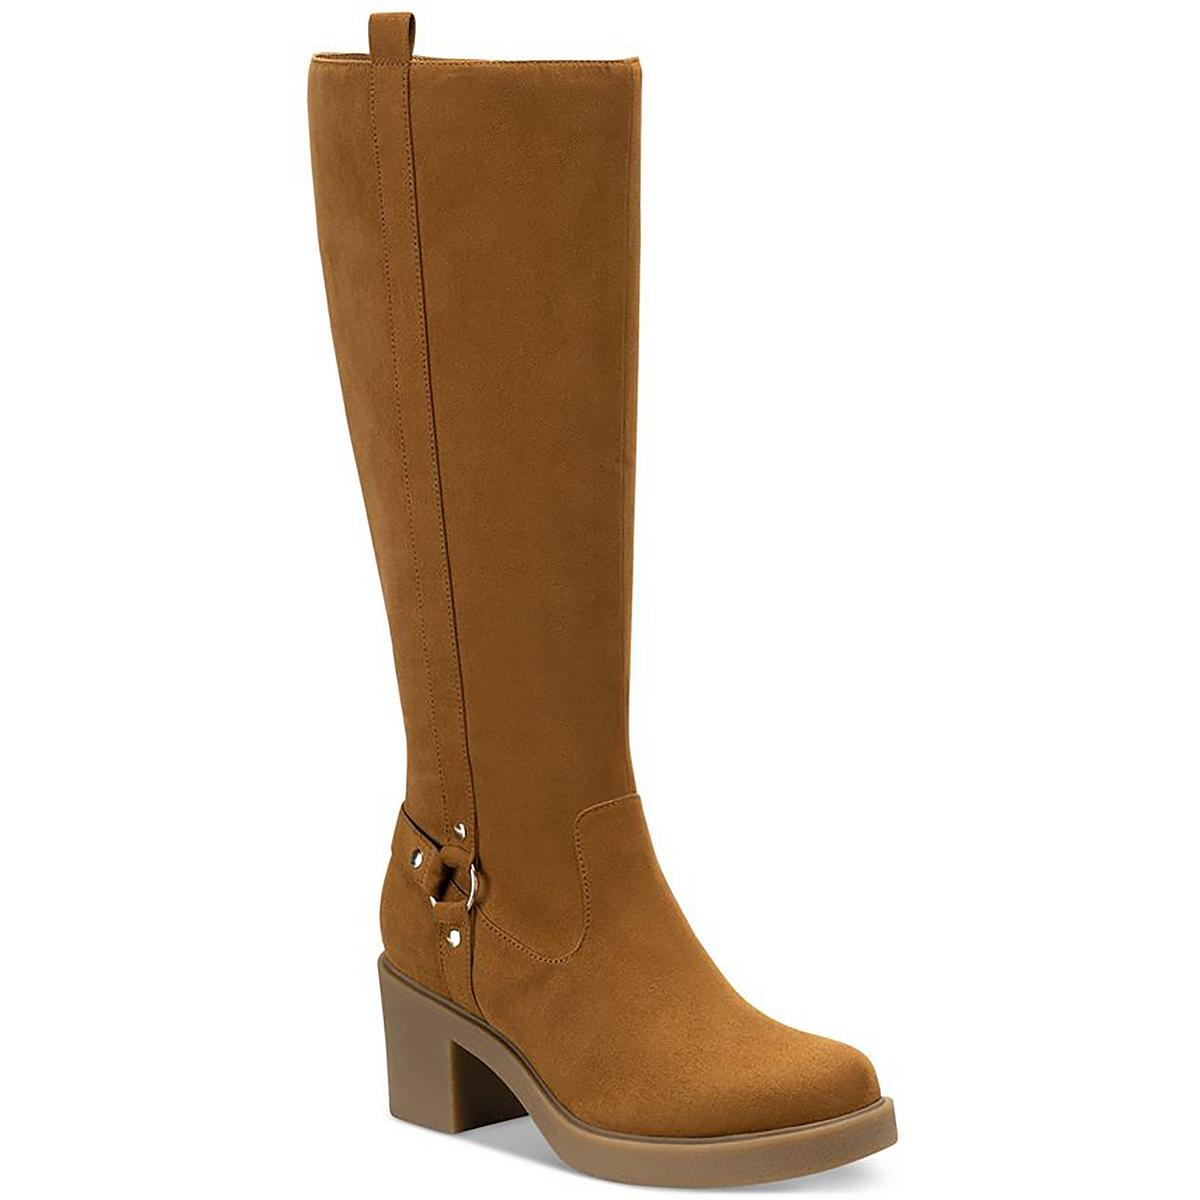 Style & Co. Brettaa Womens Faux Suede Round Toe Knee-High Boots